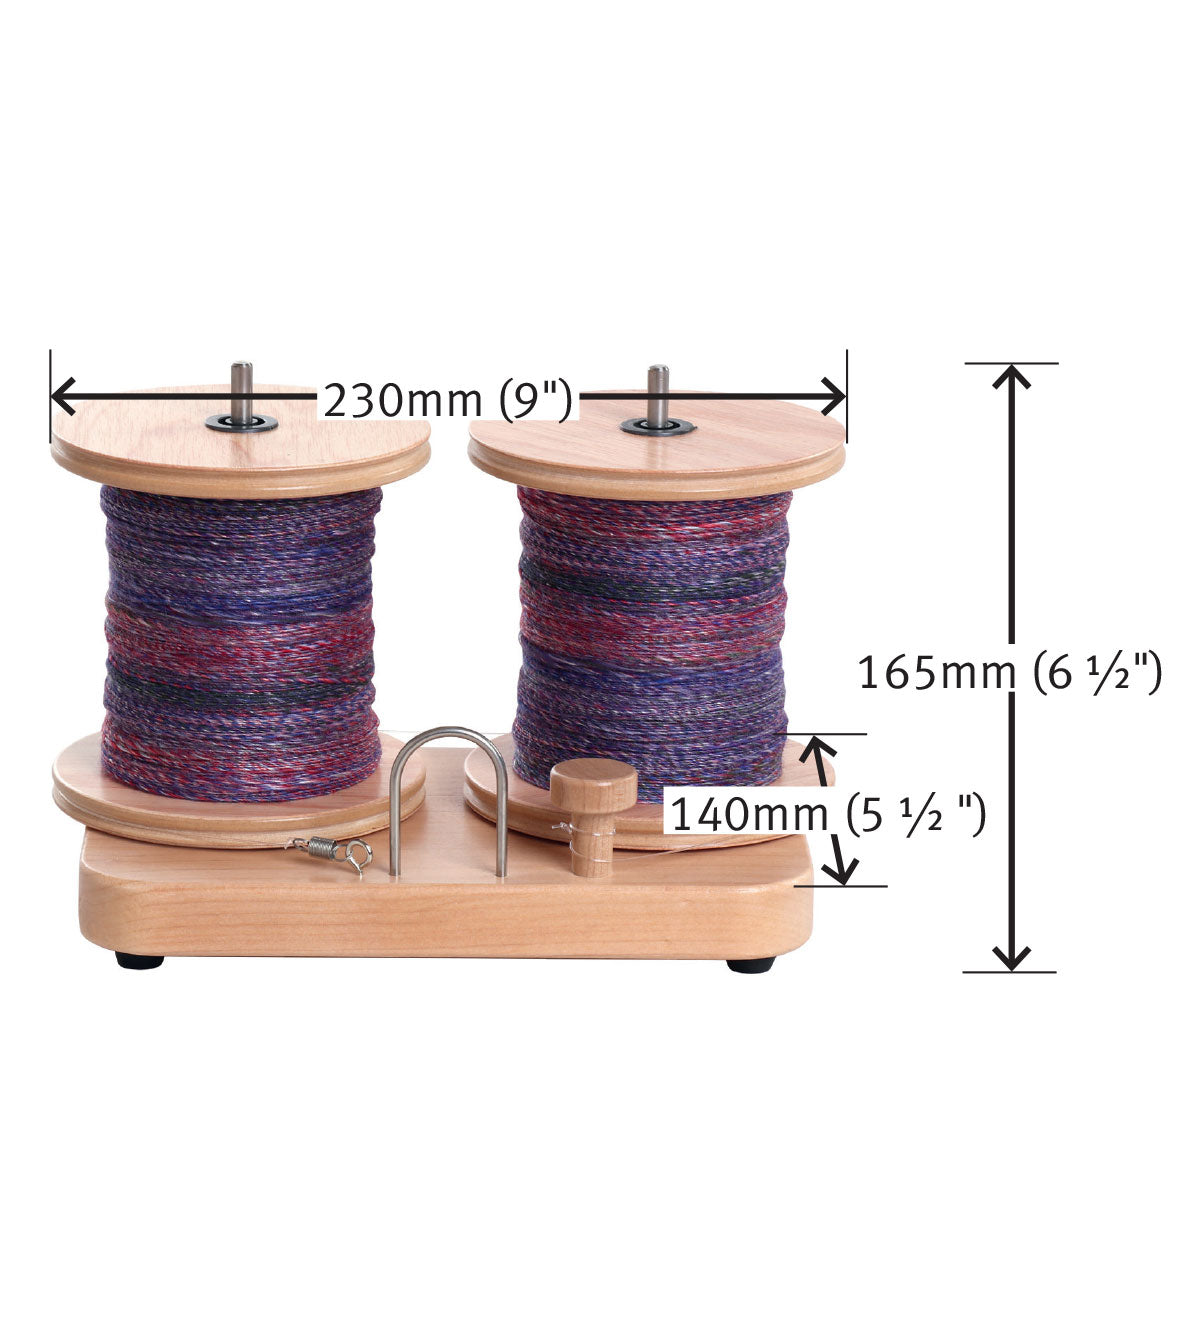 Ashford E-spinner electric spinning wheel tensioned lazy kate specifications image. The tensioned lazy kate is 6.5 inches tall with bobbins on it, and 5.5 inches wide by 9 inches long.